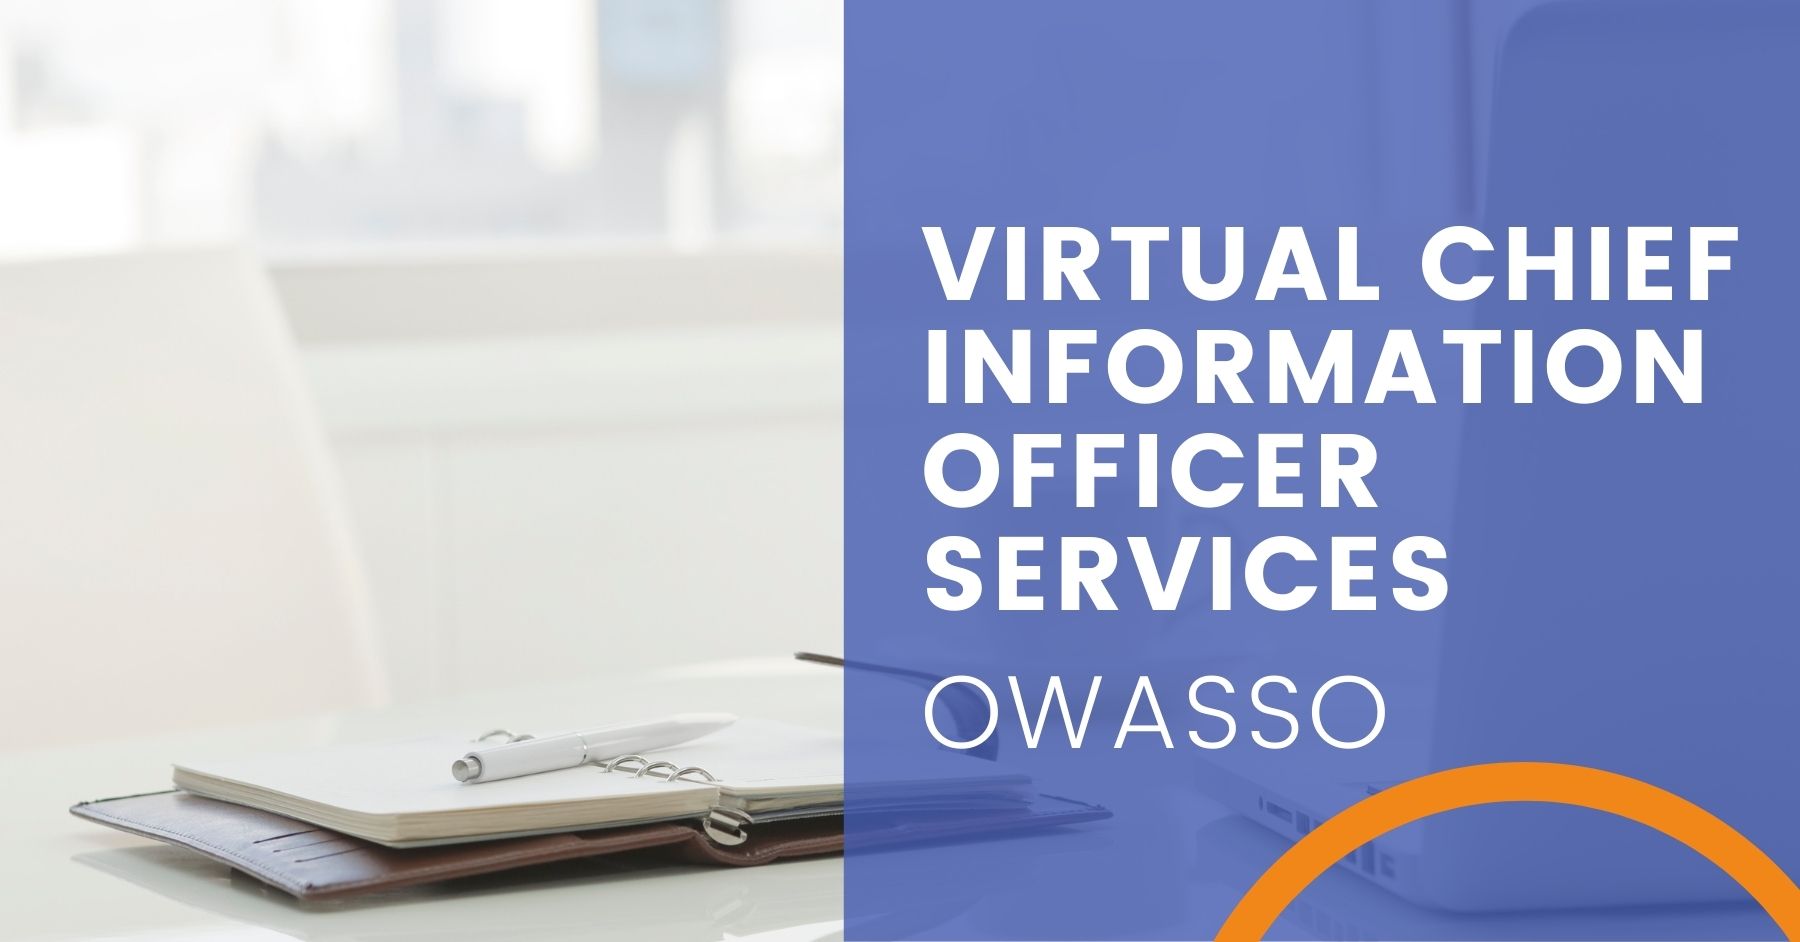 Virtual Chief Information Officer Services in Owasso, Oklahoma